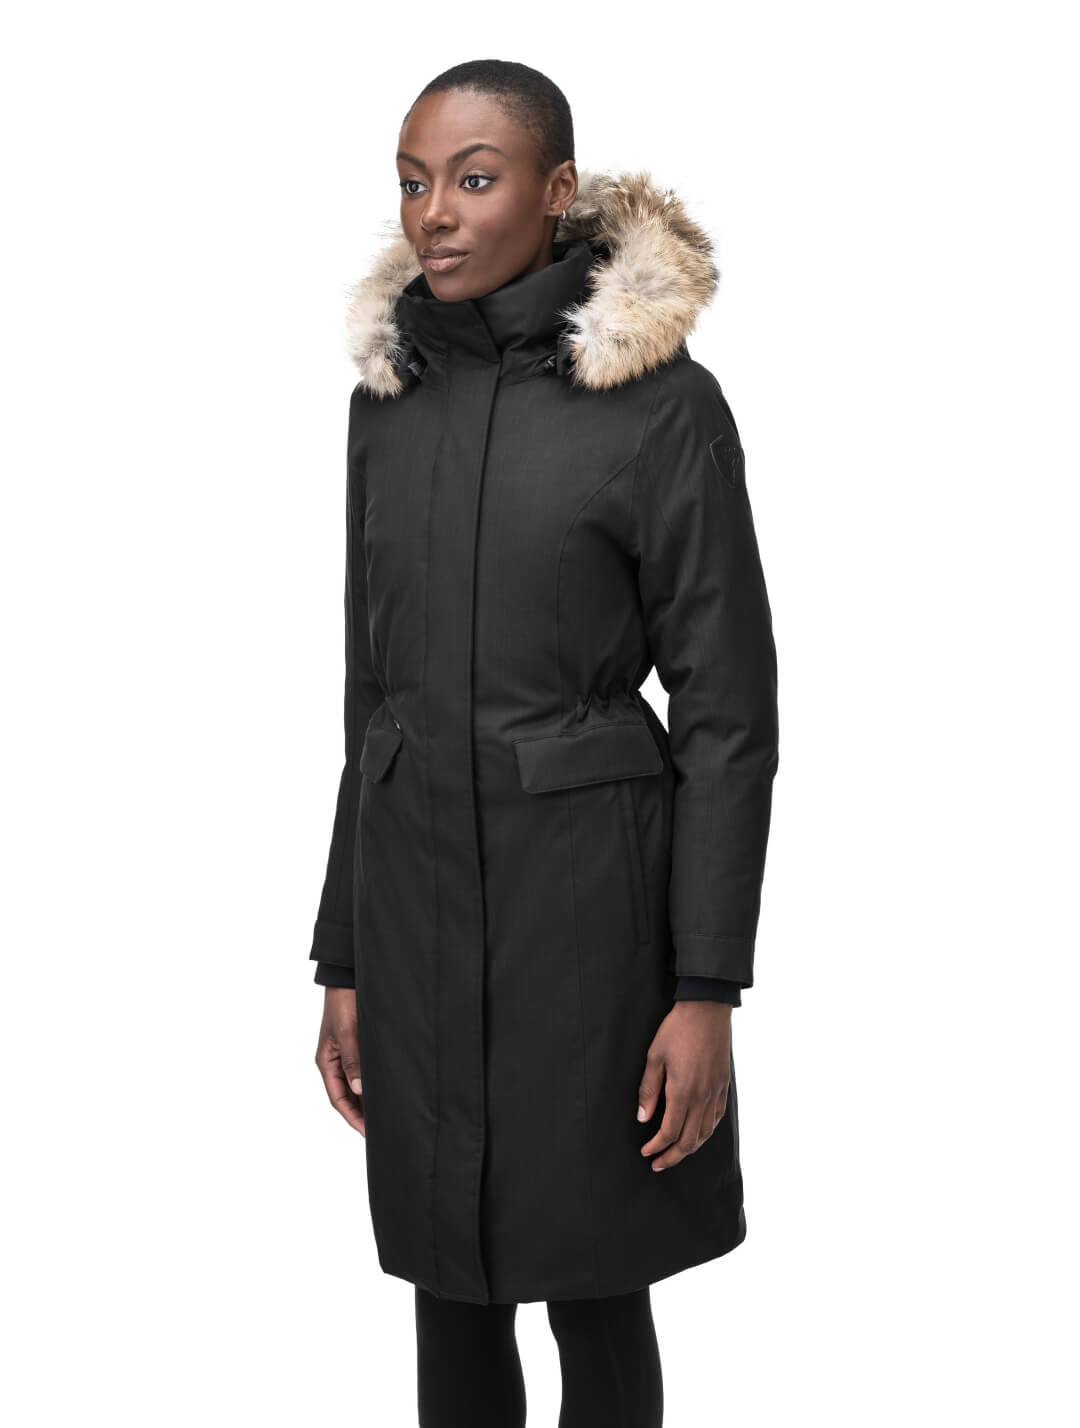 Zenith Ladies Knee Length Parka in knee length, Canadian duck down insulation, removable hood with removable fur ruff trim, and two-way front zipper, in Black